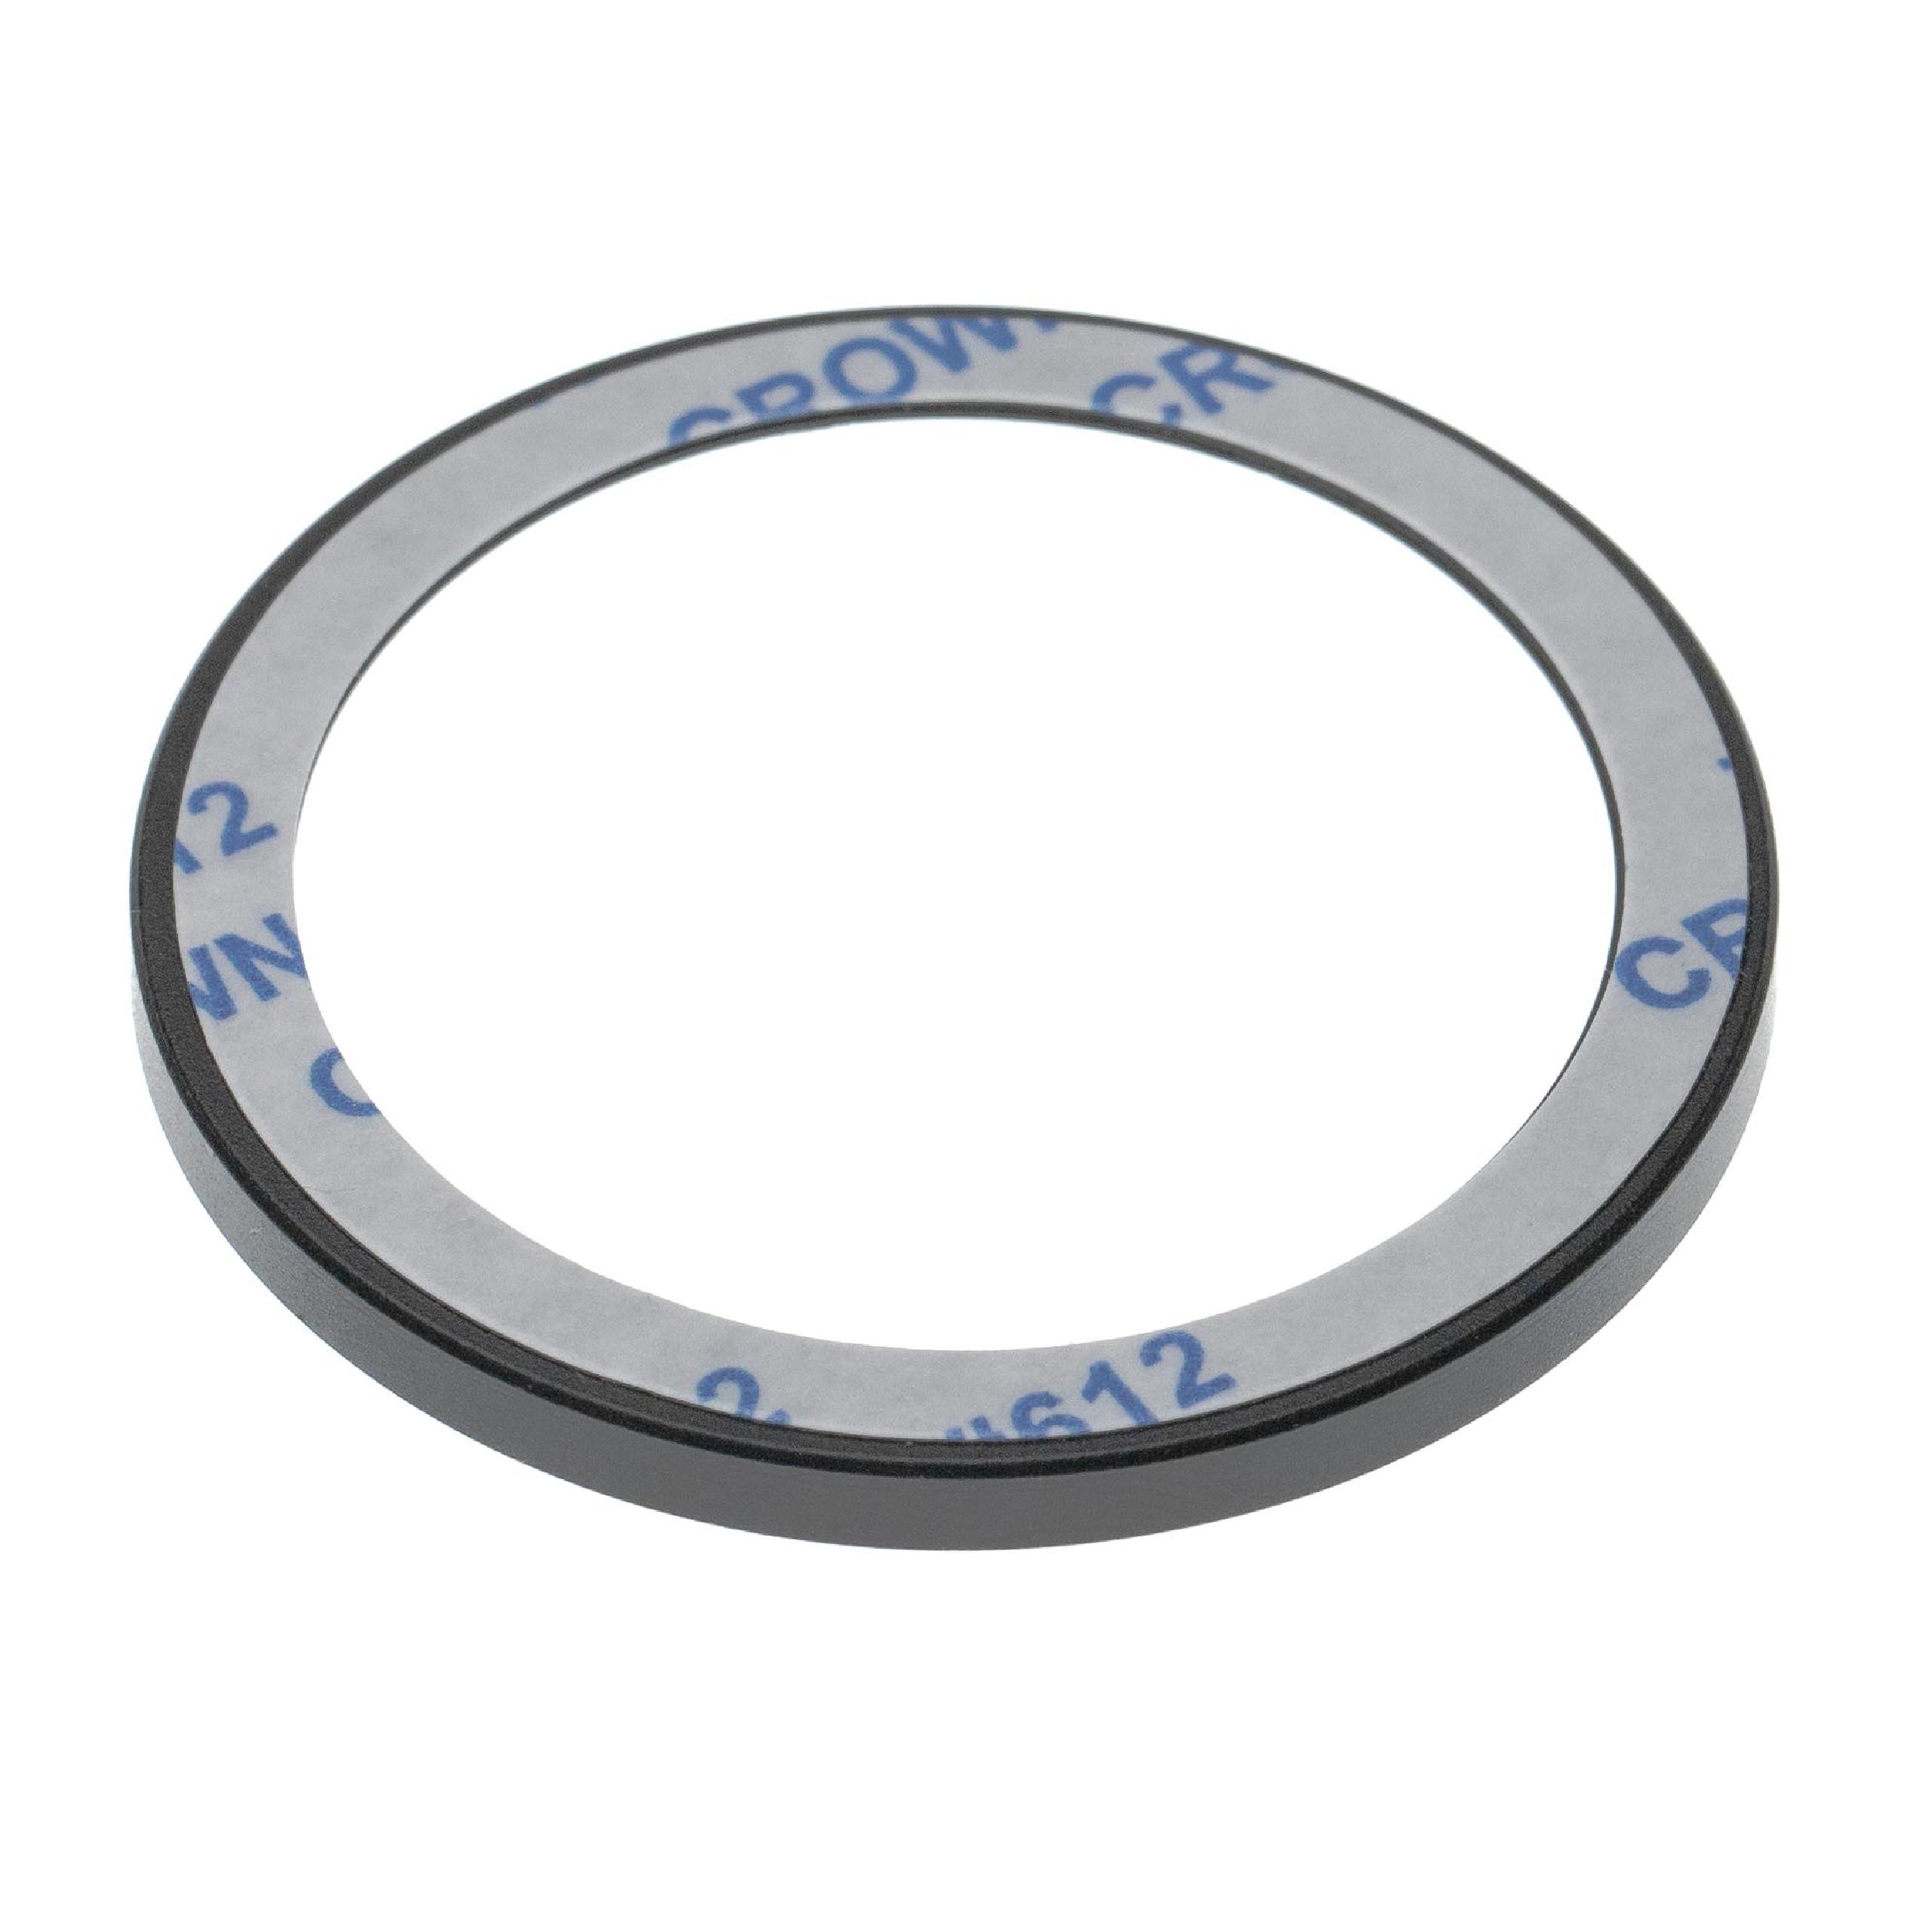 40.5 mm Filter Adapter suitable for P7100 Nikon, Sony, Canon Coolpix Camera Lens etc.